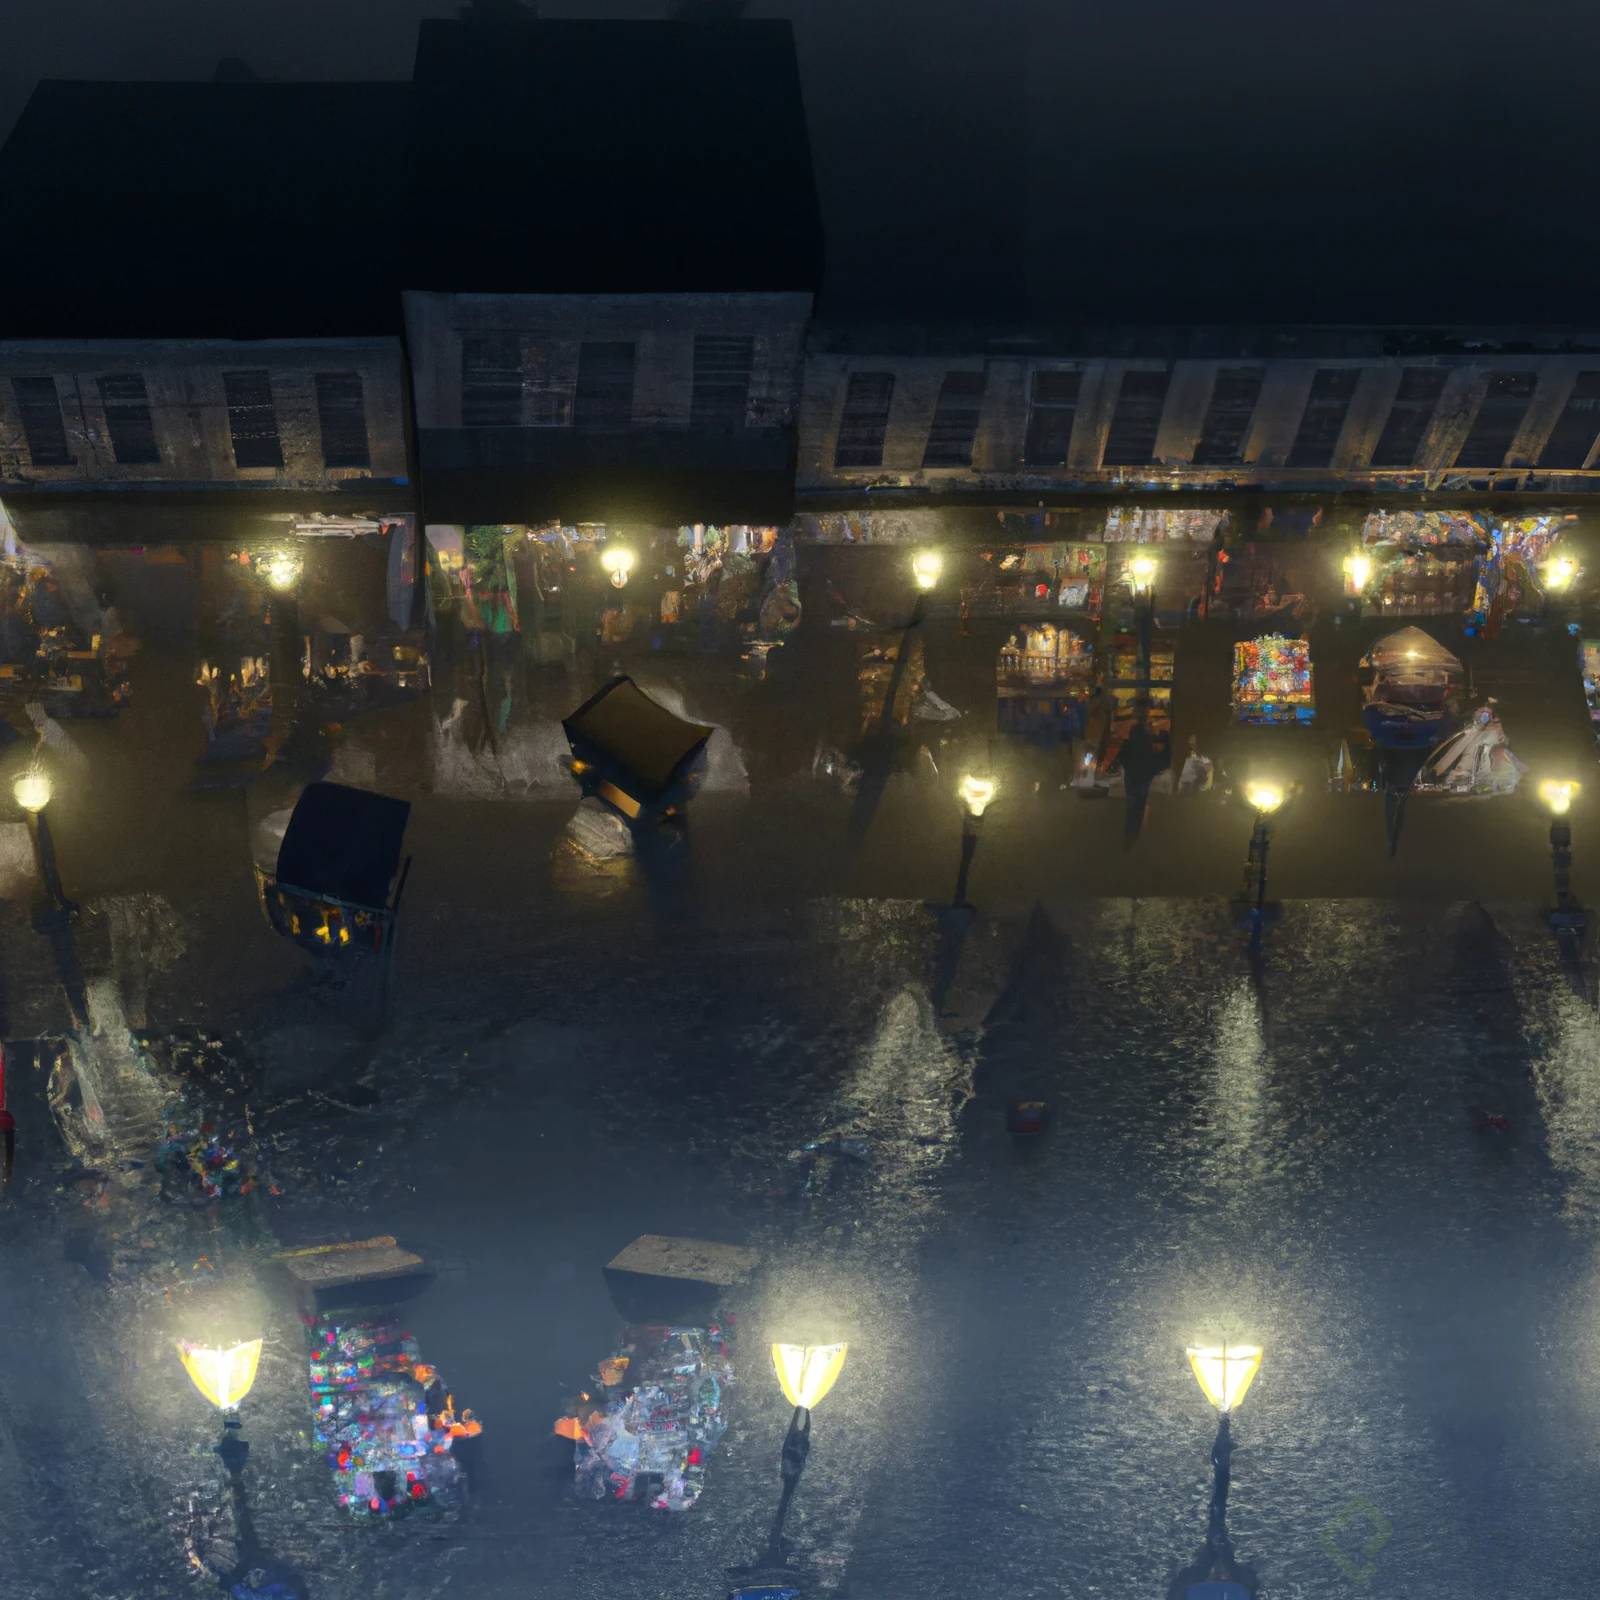 DALLÂ·E 2023-02-15 23.26.14 - Picture of (An alley with merchant stalls) at night, a little rain, romantic emotions, top view, 4k quality, colonial style _ fog, haze, people, defor.png